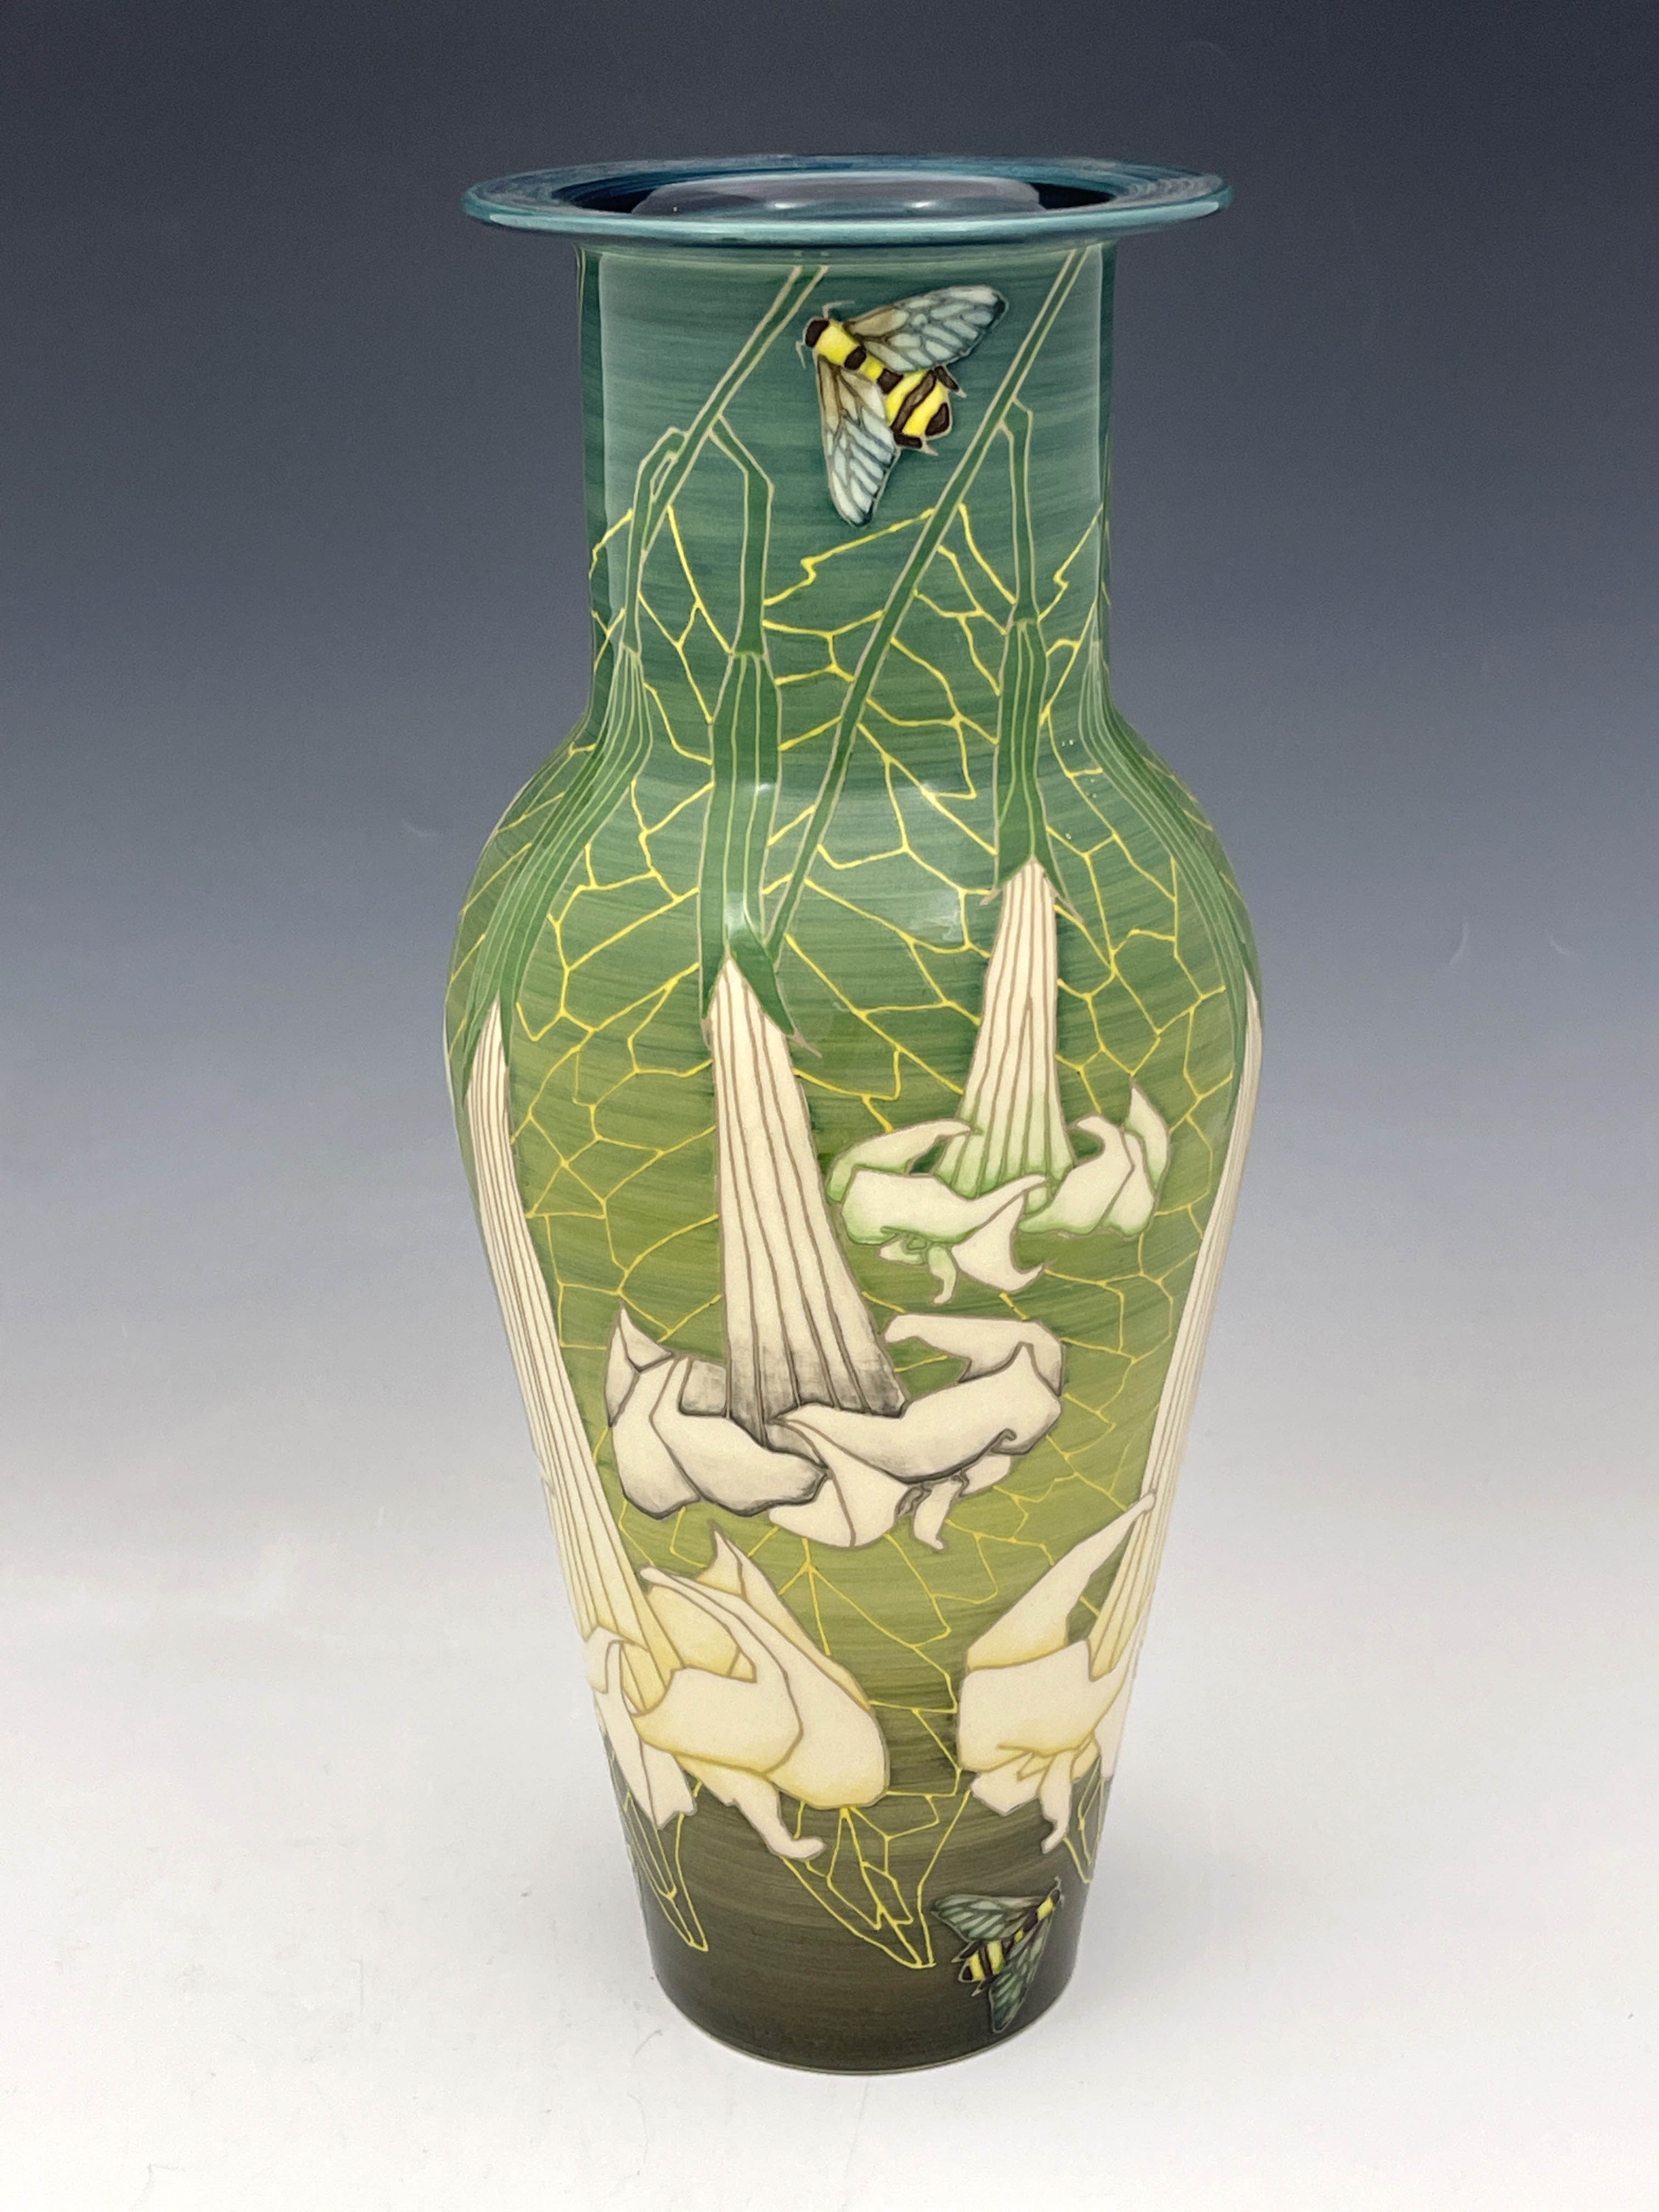 Sally Tuffin for Dennis Chinaworks, Datura pattern vase, Etruscan form, 2002, marked No 1, 41cm high - Image 2 of 5